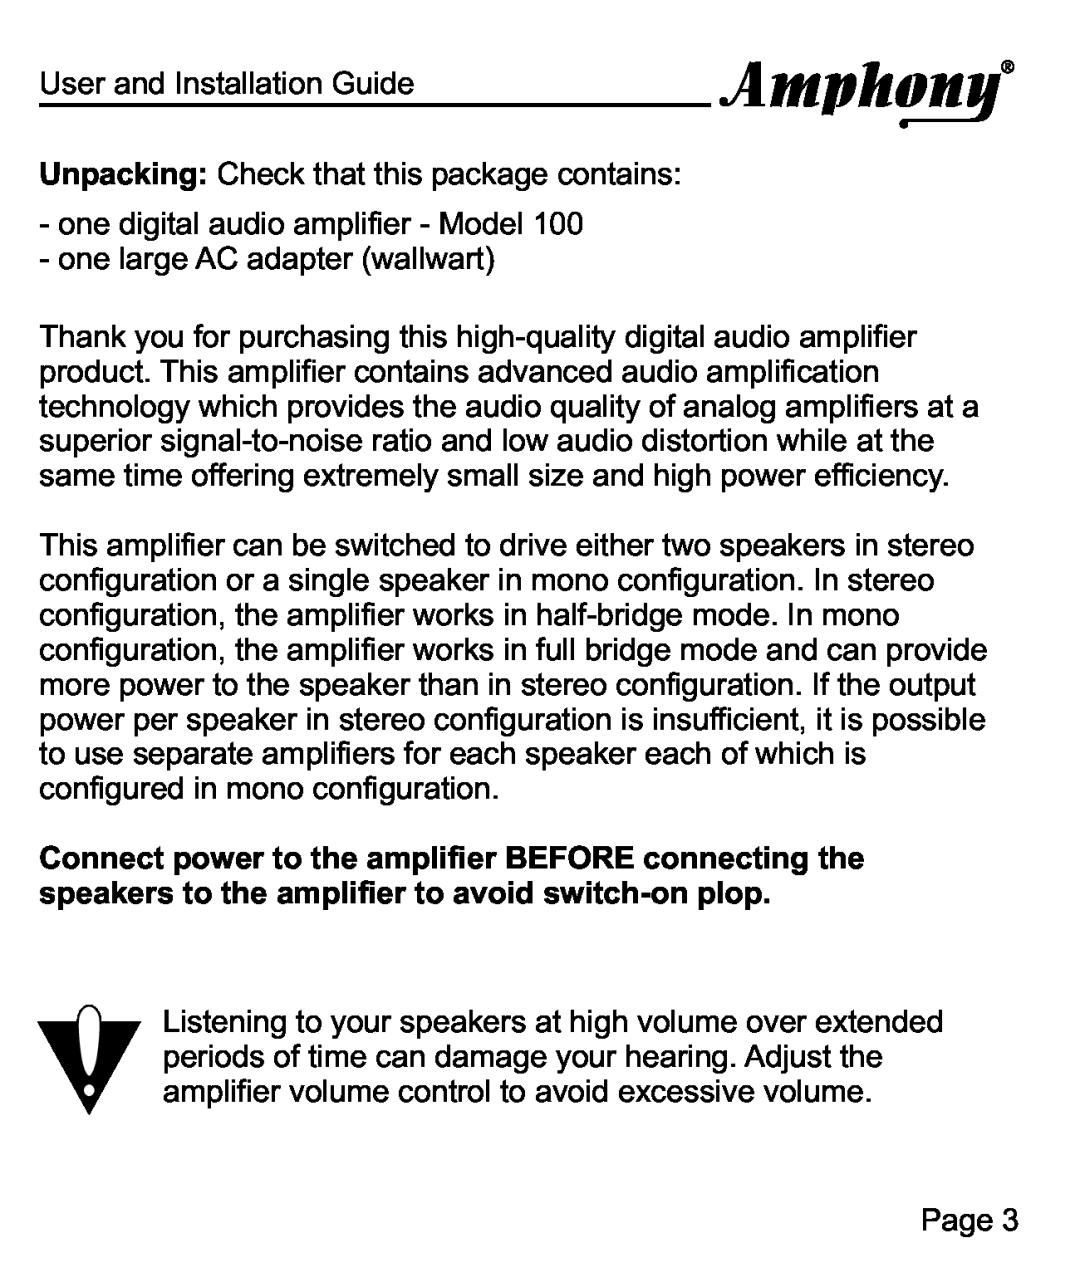 Amphony 100 manual User and Installation Guide 